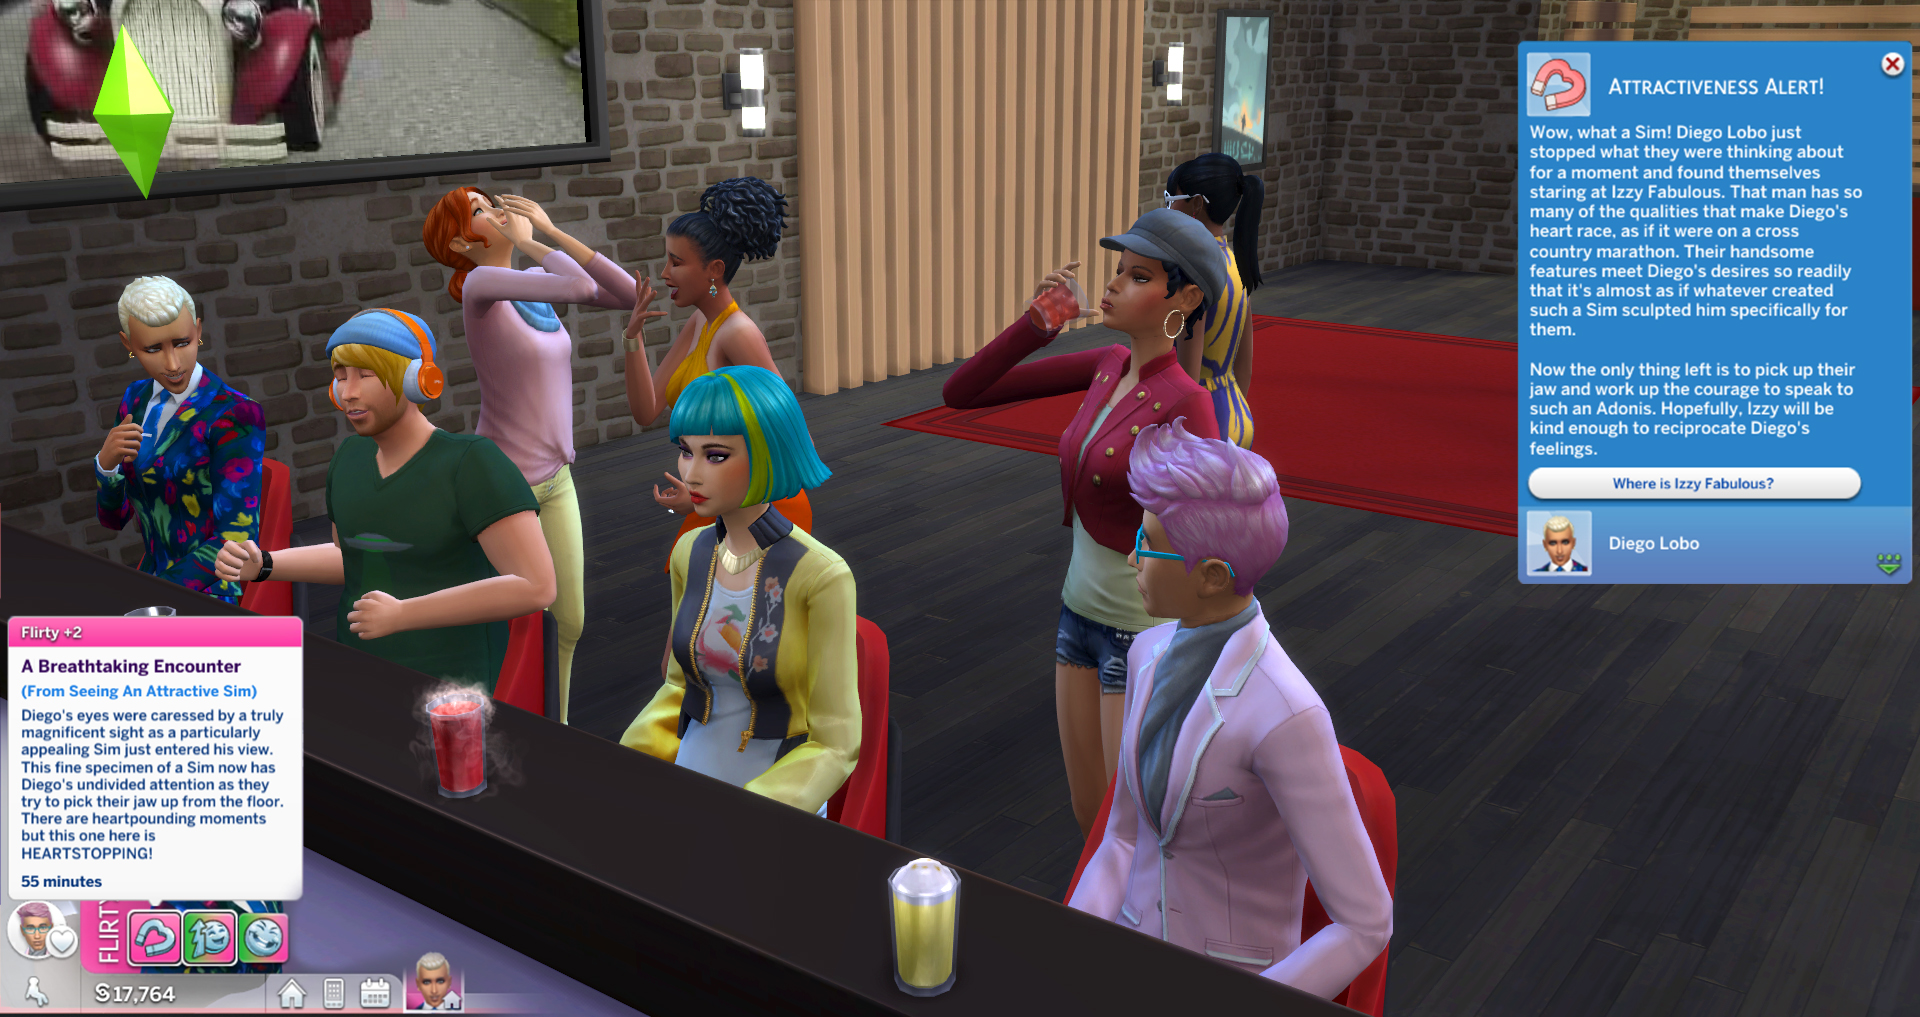 Sims 4 mod whims